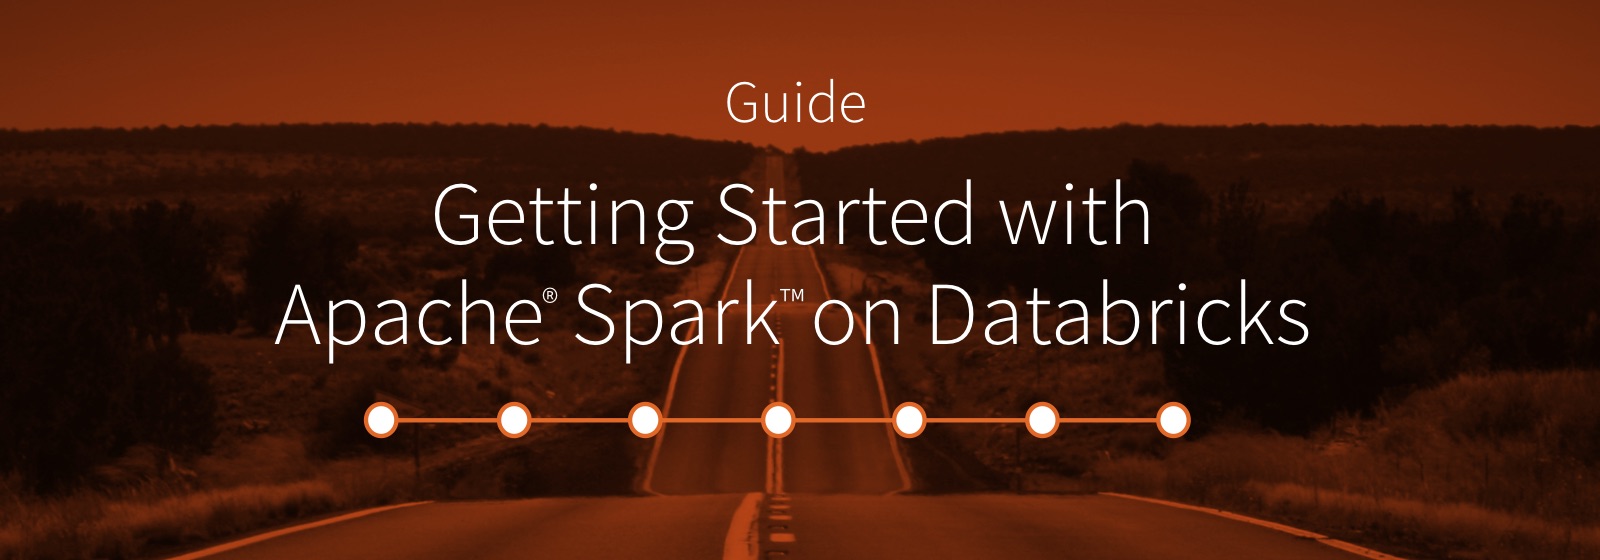 Visit the Getting Started with Apache Spark on Databricks Guide